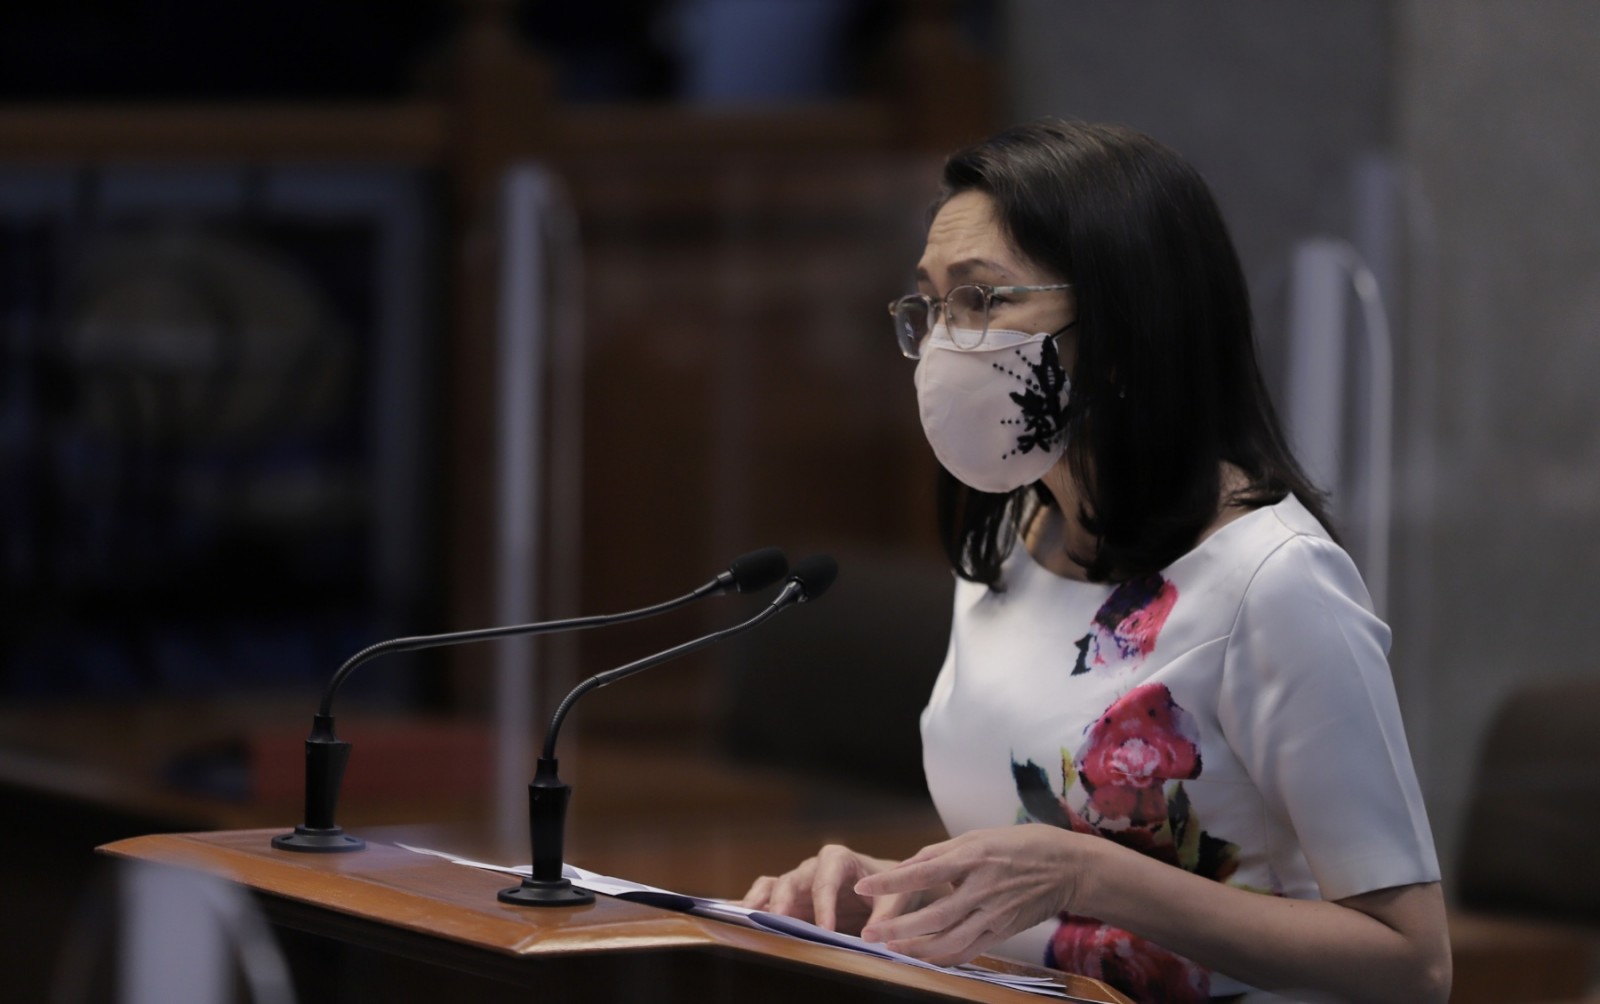 “Return to sender.”  Senator Risa Hontiveros issued this call on Wednesday as she urged Malacañang to amend its “pre-Delta” 2022 national budget submission to Congress, saying it failed to allocate sufficient funds for “essential items” needed to help the country recover from the pandemic.